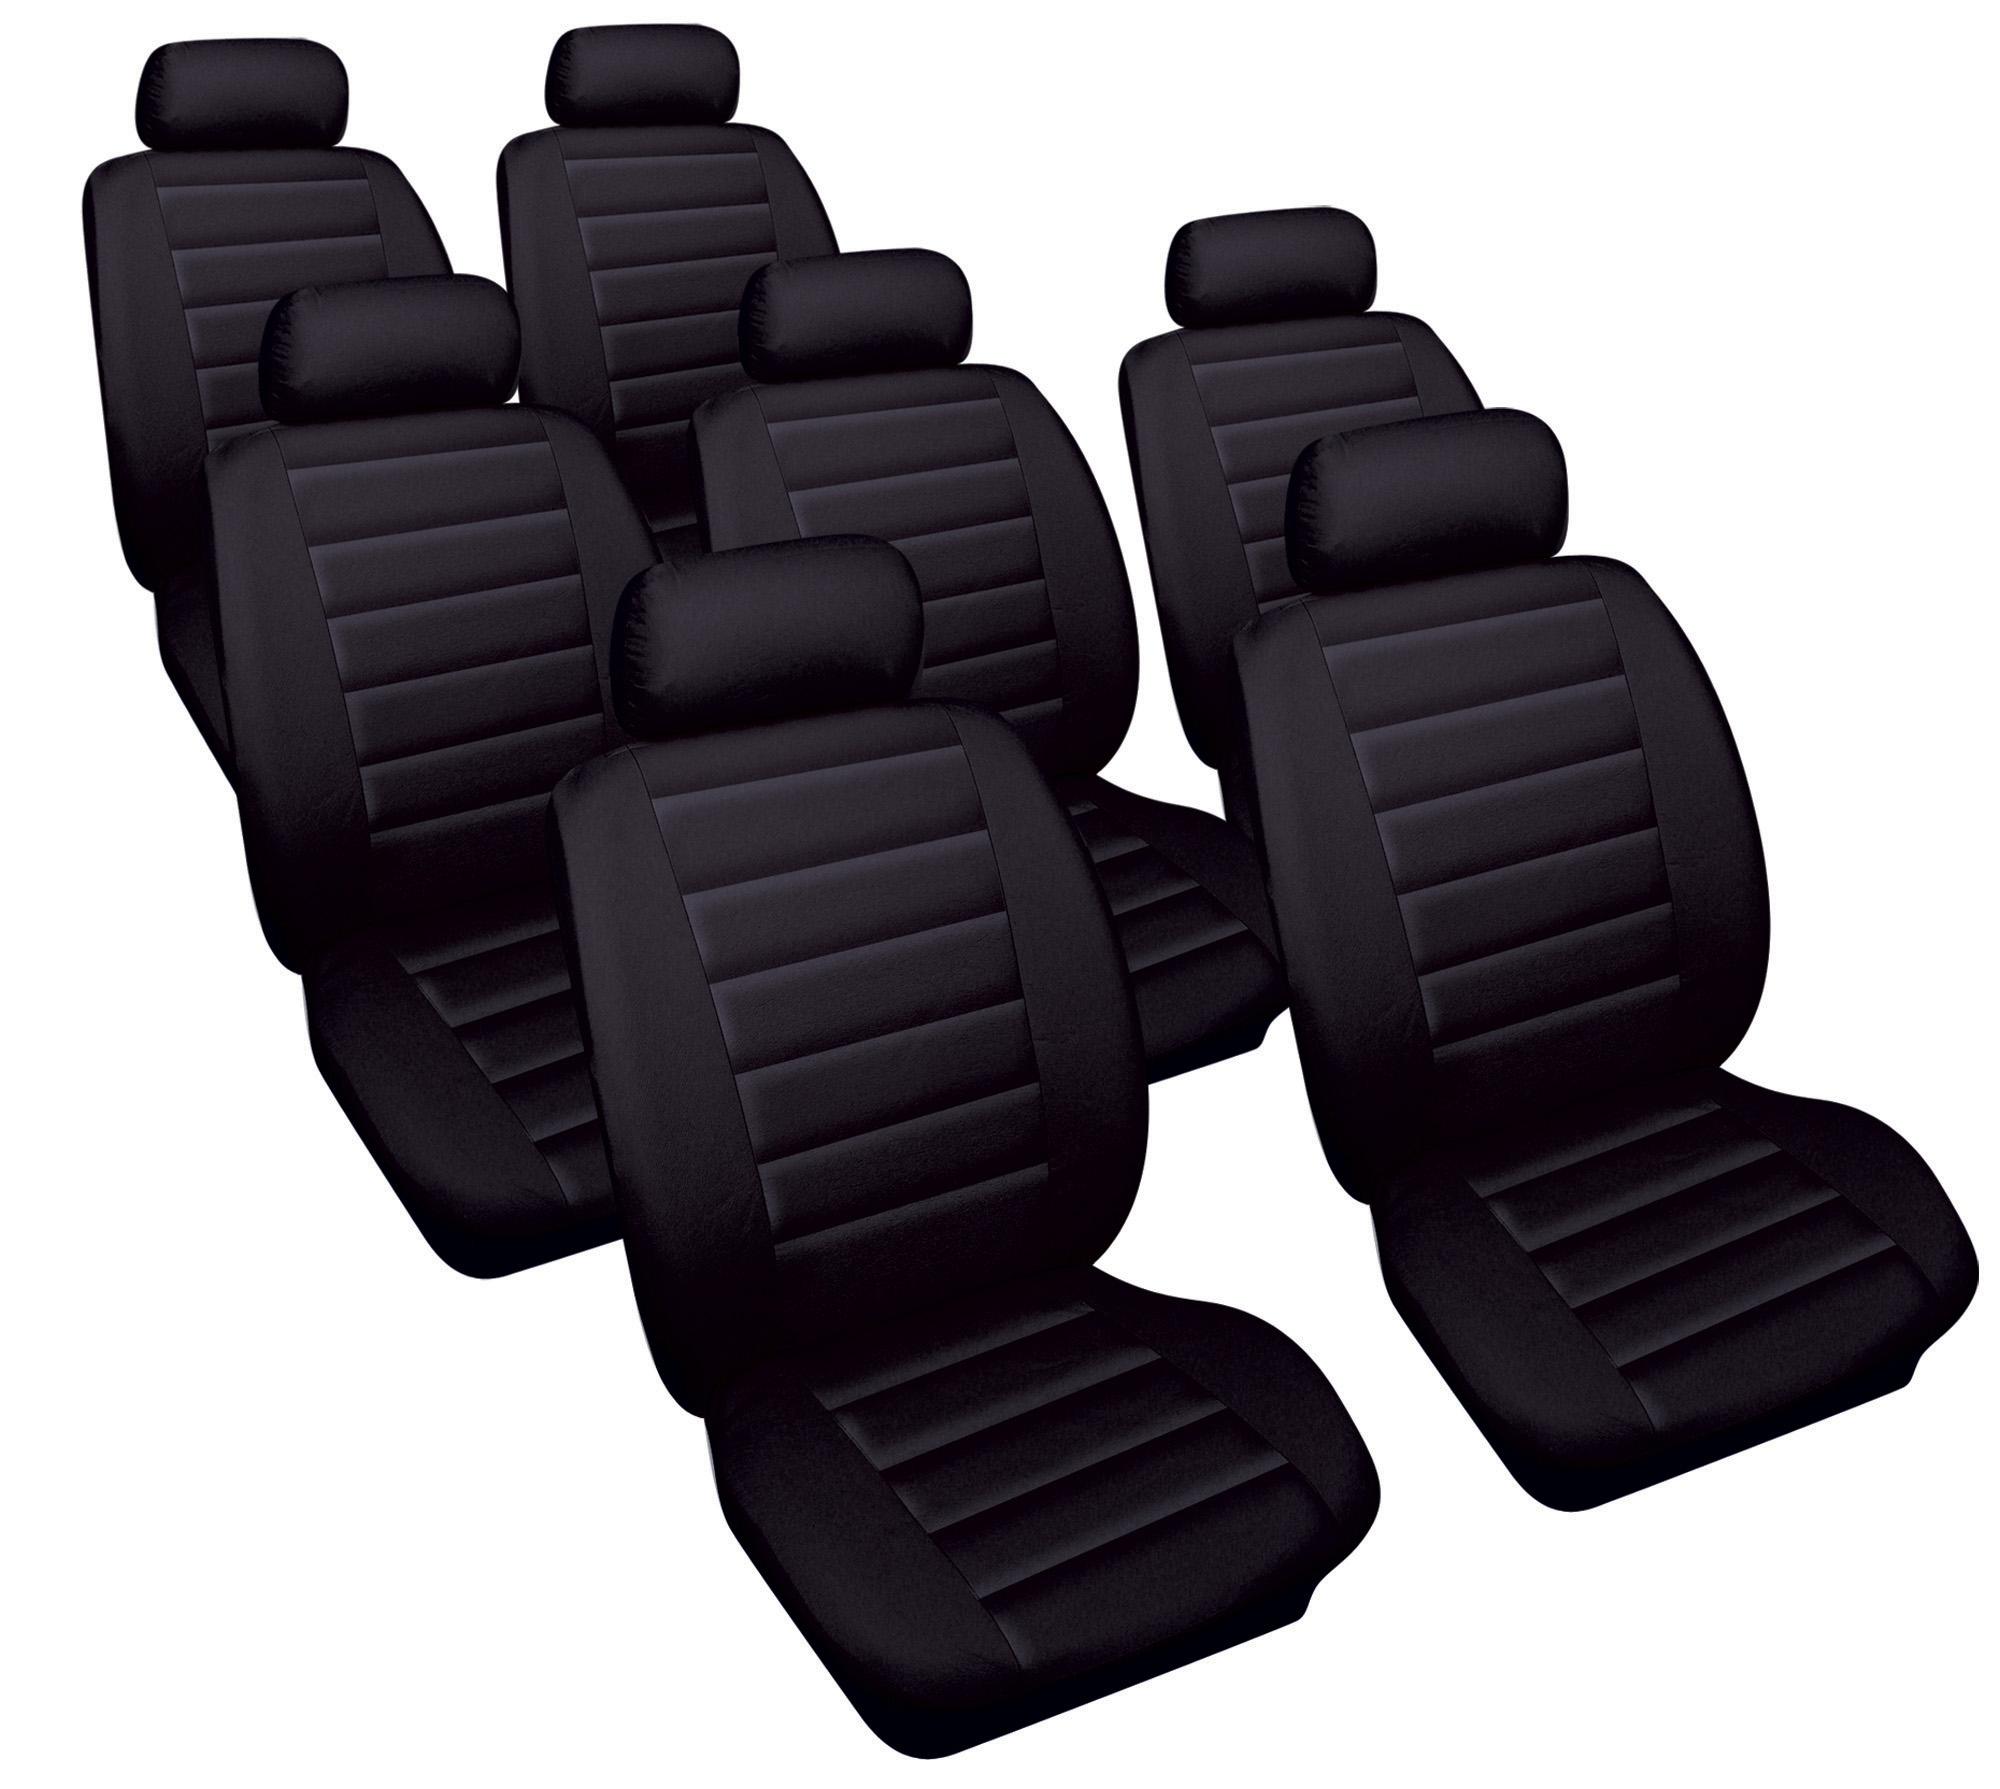 toyota previa car seat covers #2